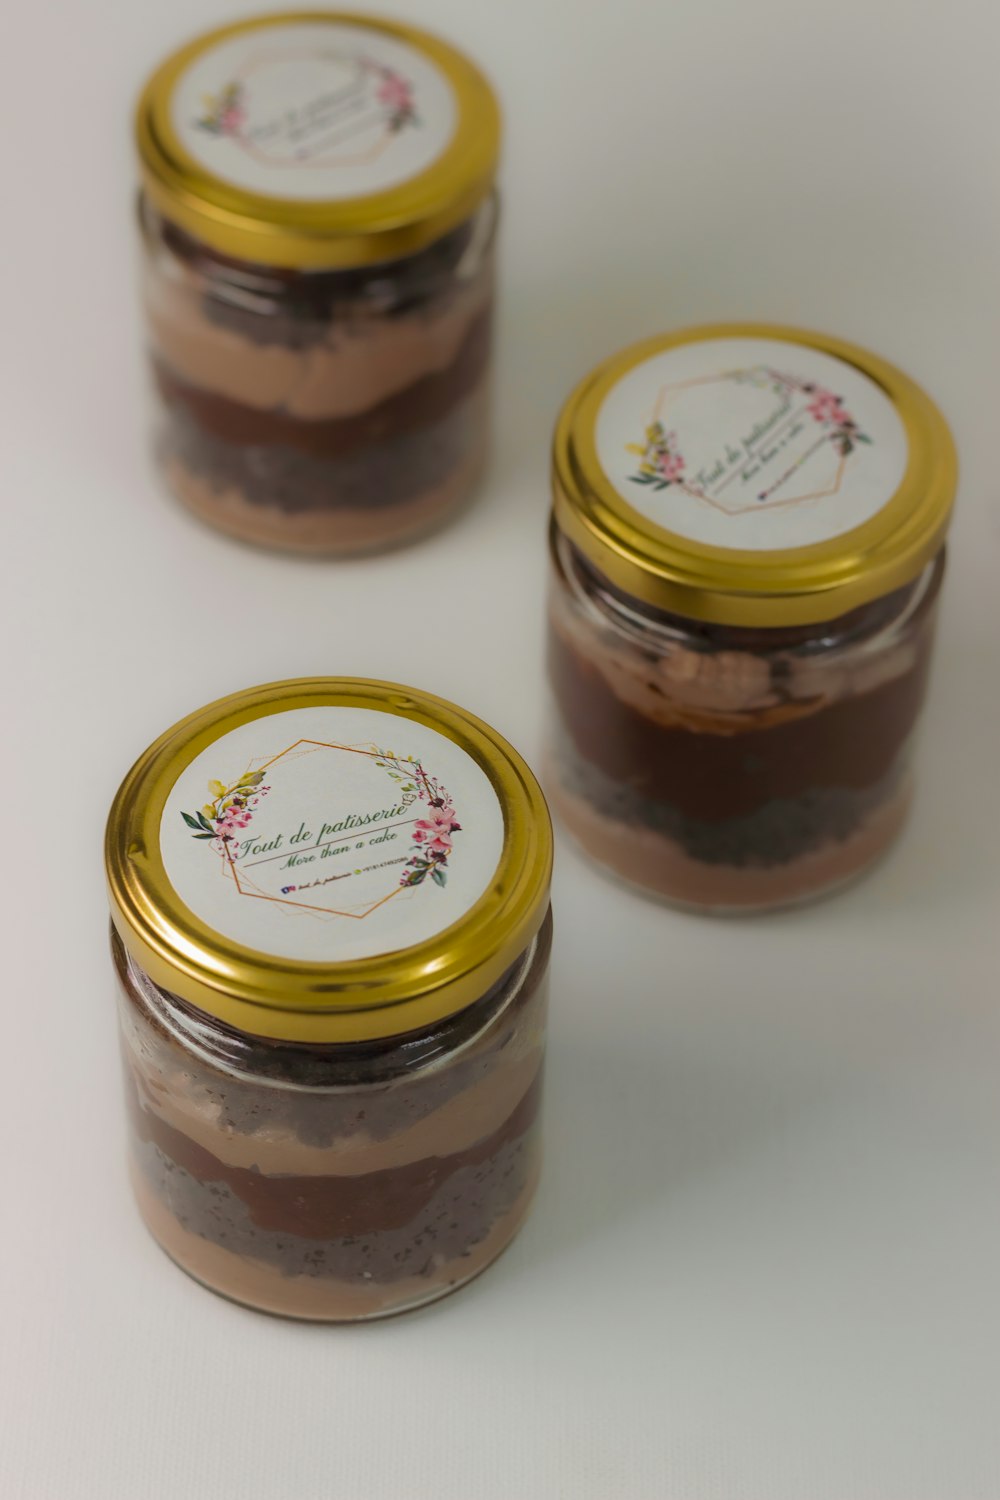 two brown and white labeled jars